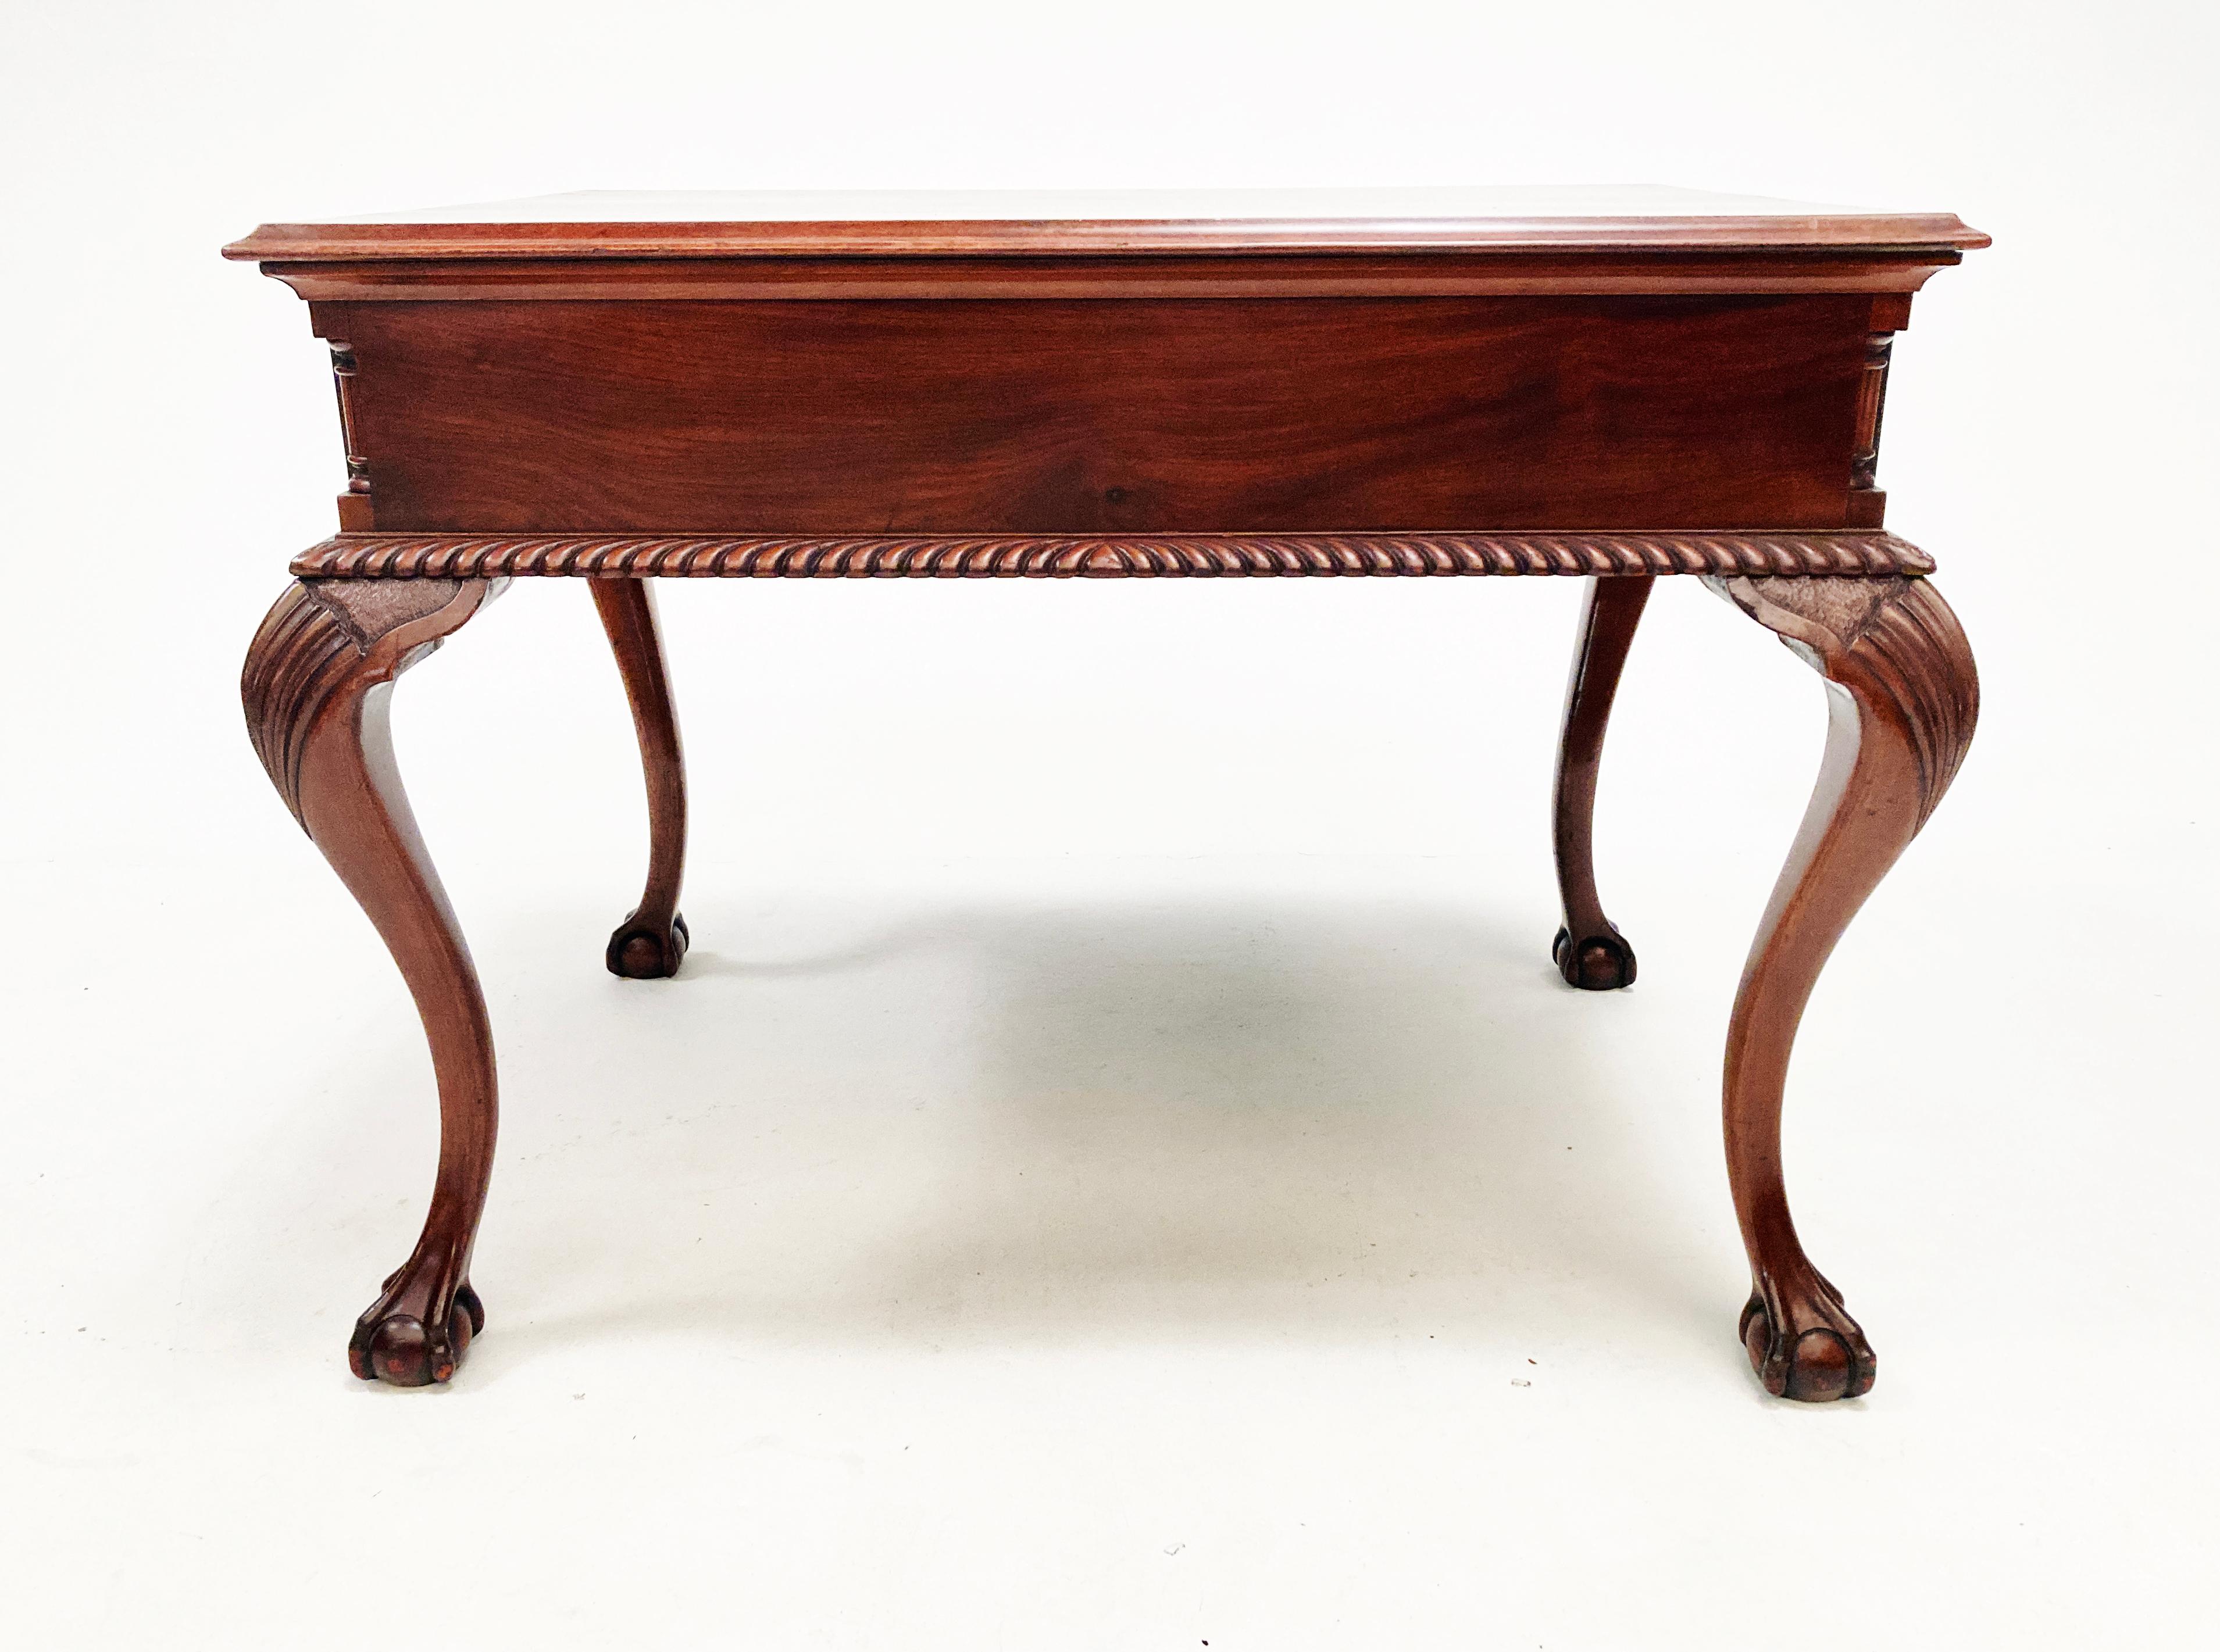 Hand-Carved Single Drawer Mahogany Chippendale Table Ball Claw Feet English Mid 19th Century For Sale